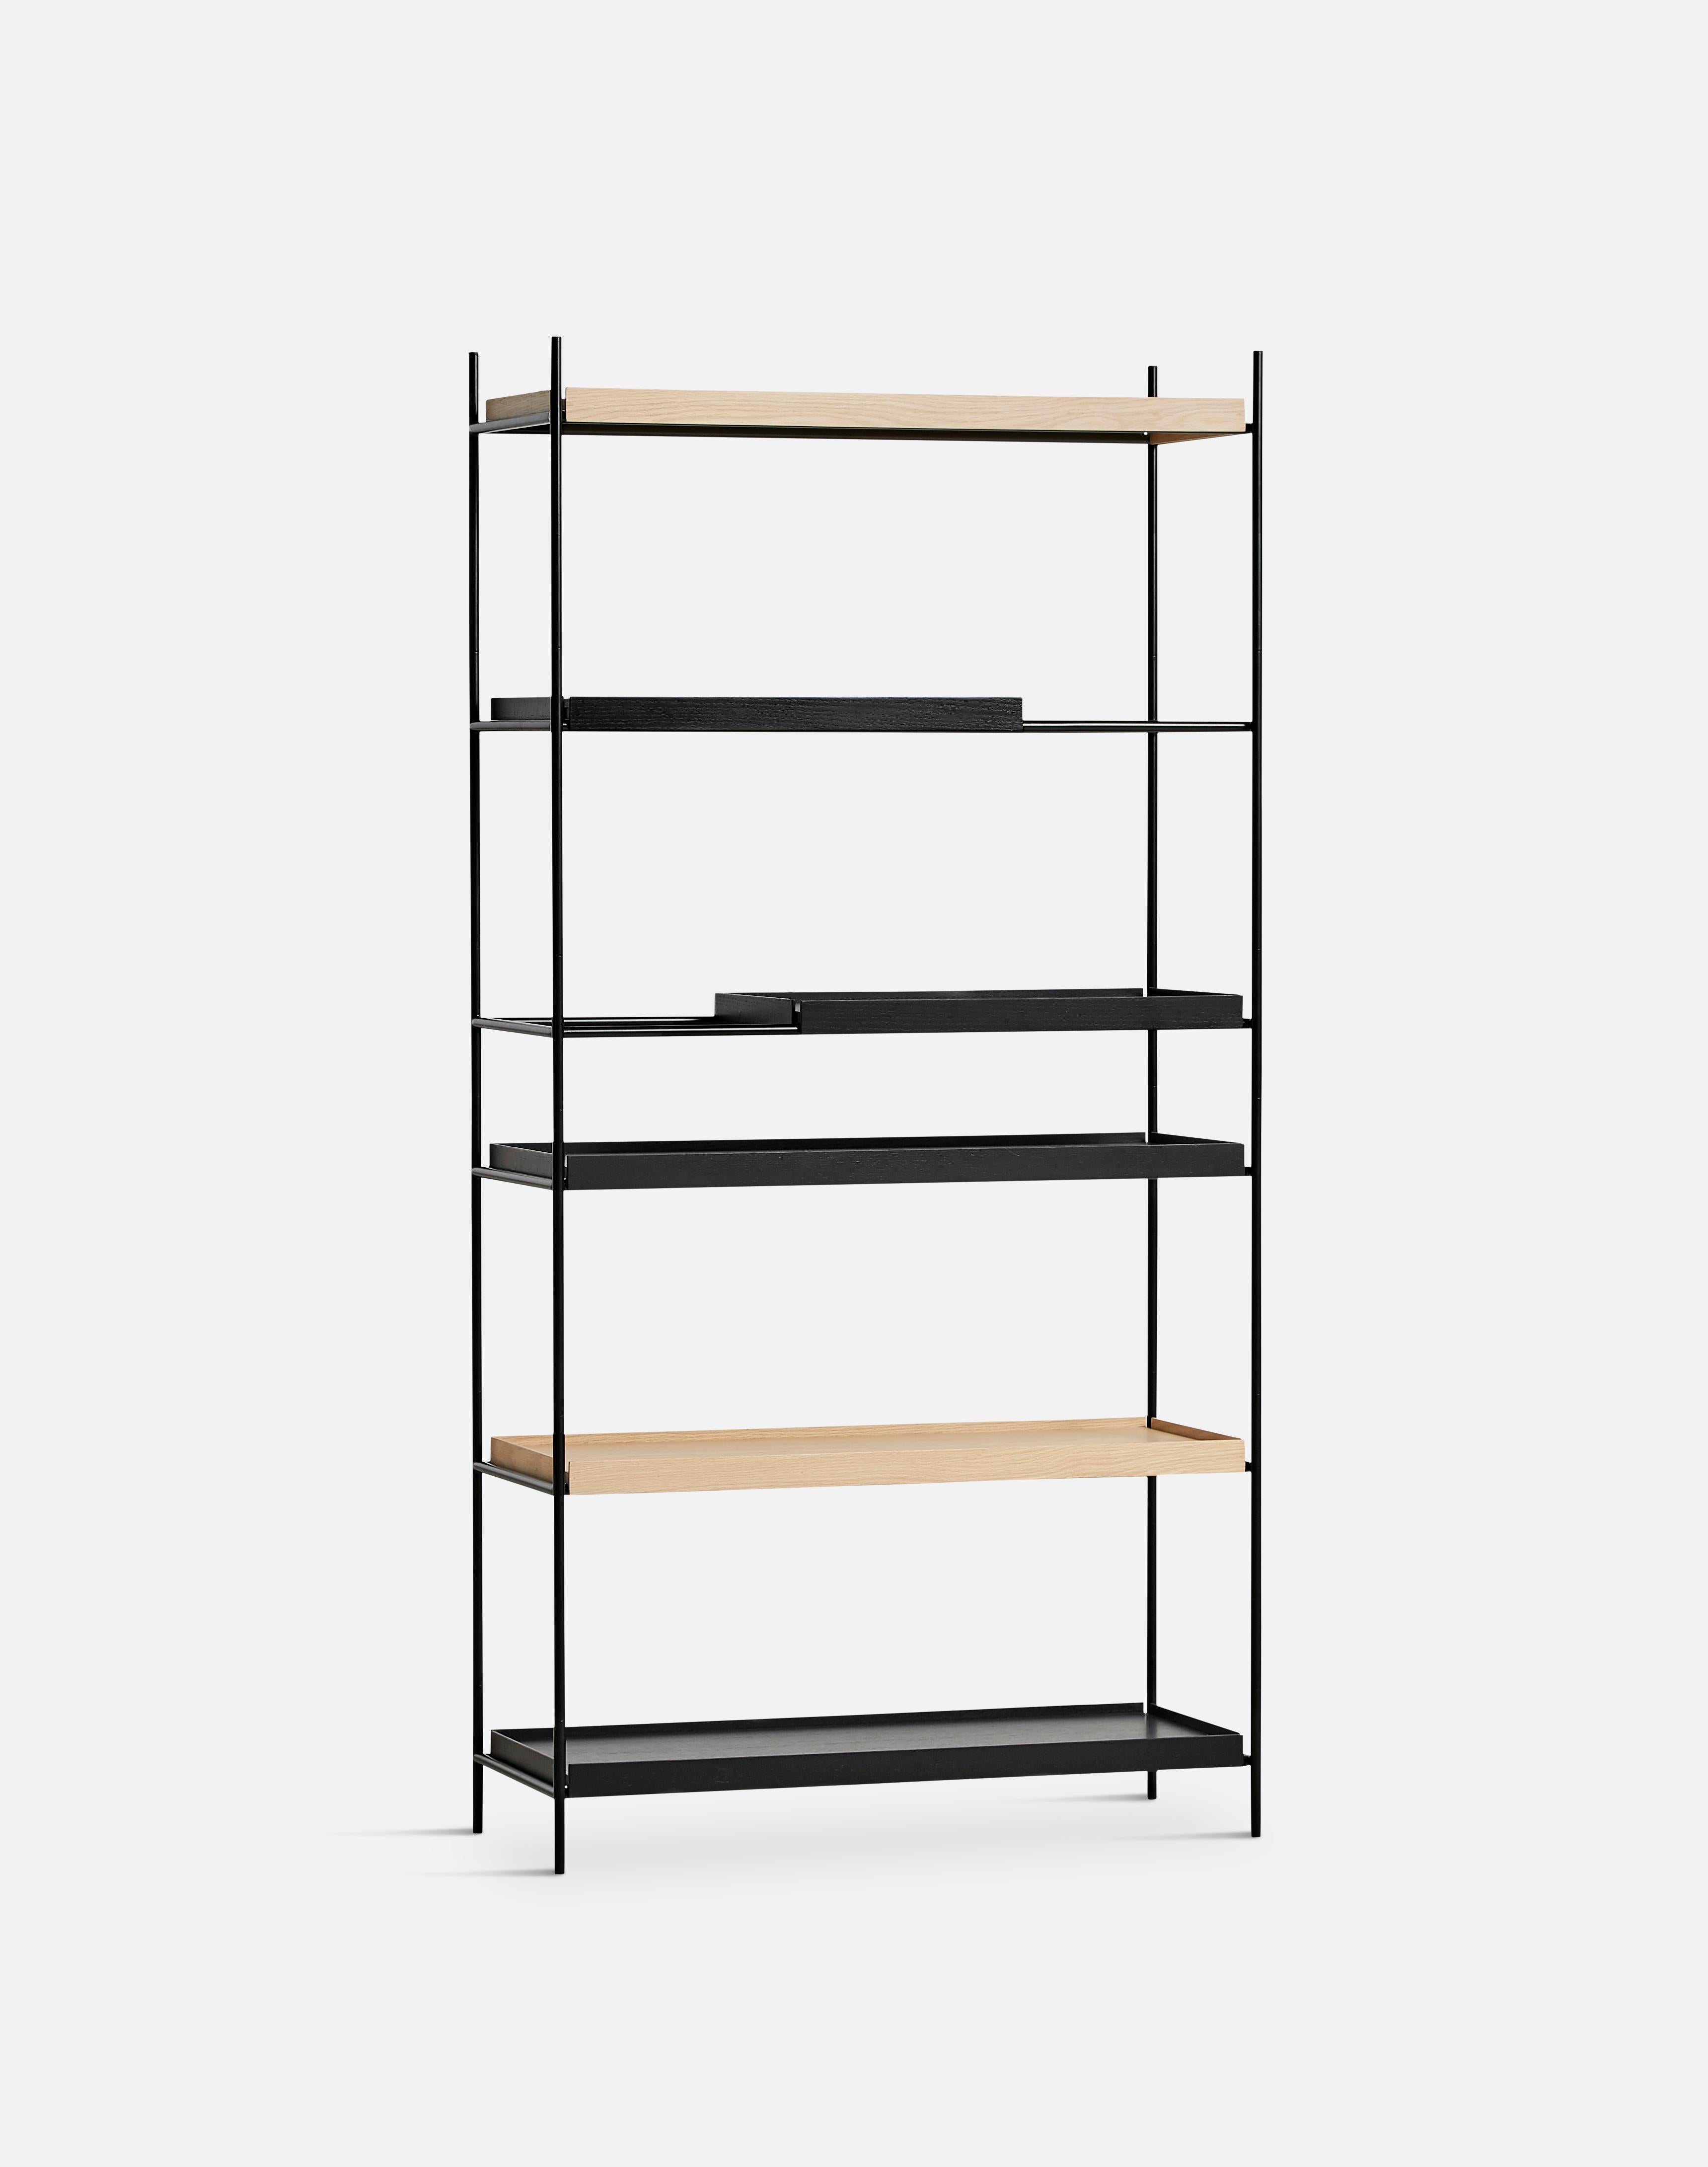 High Oak and black tray shelf II by Hanne Willmann
Materials: Metal, oak.
Dimensions: D 40 x W 100 x H 201 cm
Also available in different tray combinations and 2 sizes: H81, H 201 cm.

Hanne Willmann is a dynamic German designer with her own